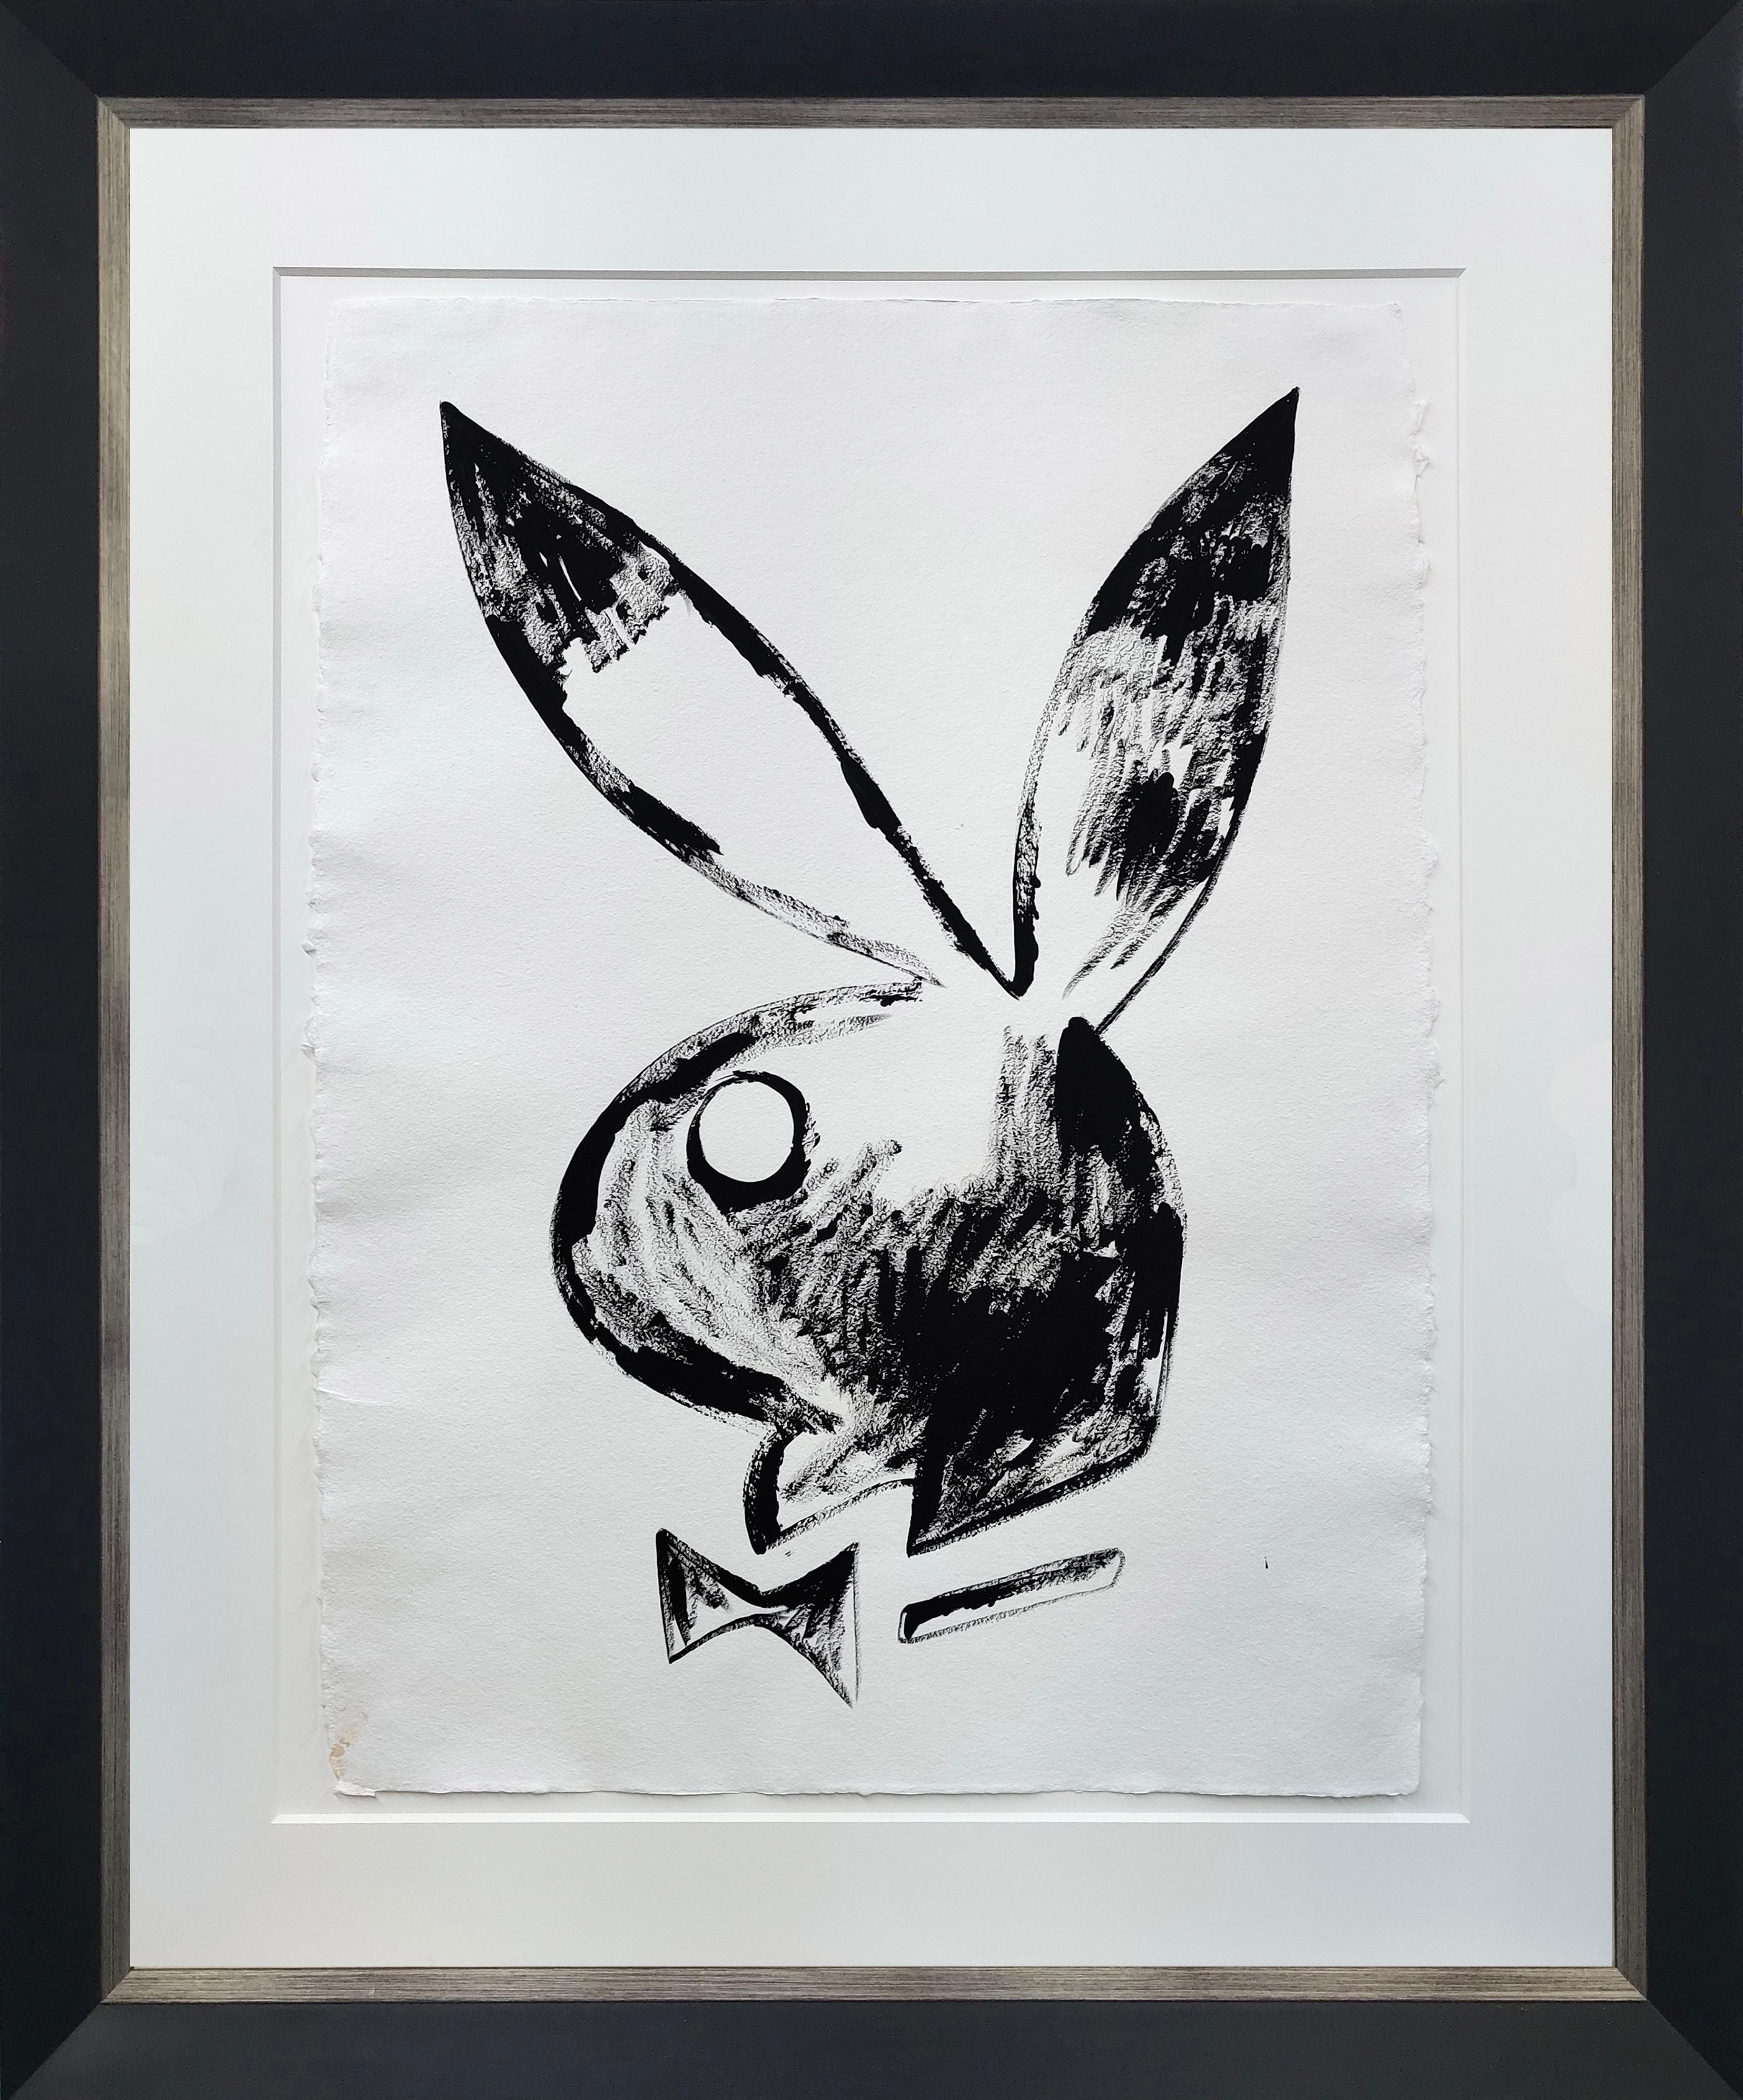 PLAYBOY BUNNY - Painting by Andy Warhol